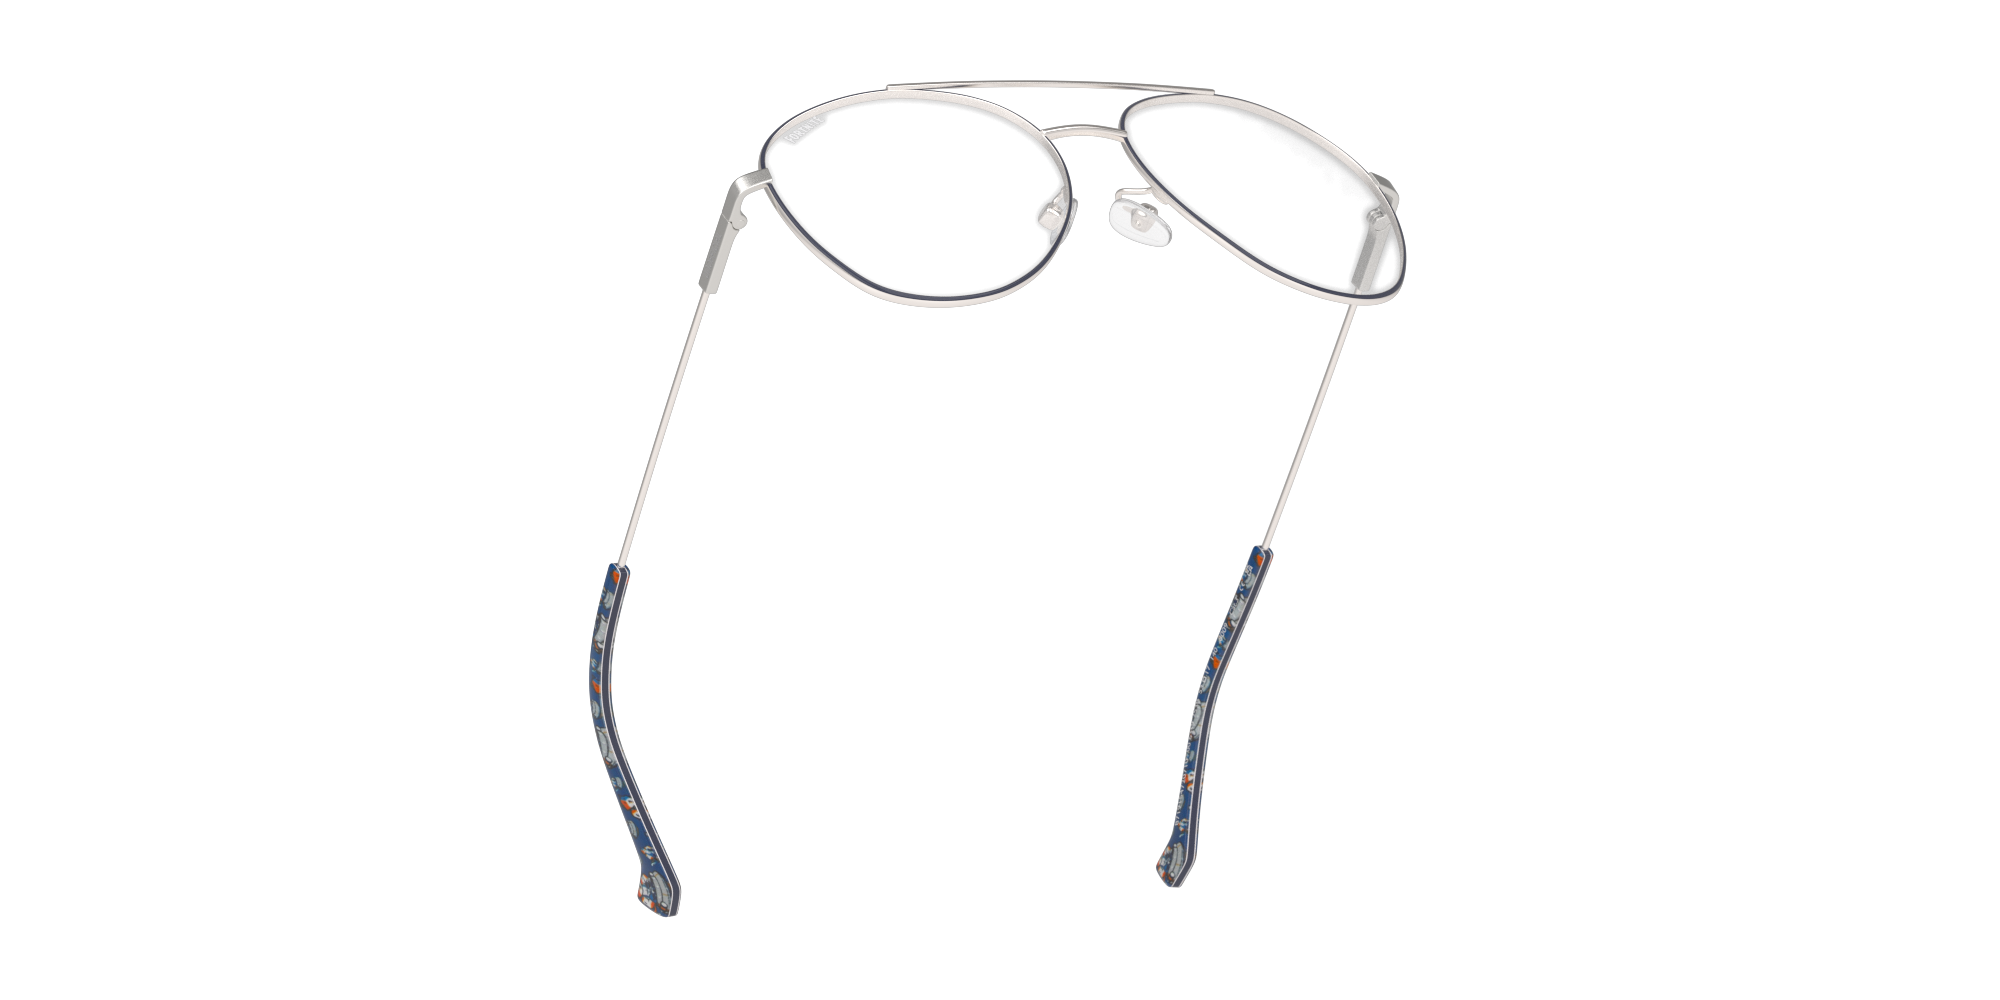 Bottom_Up Fortnite with Unofficial UNSU0166 Glasses Transparent / Grey